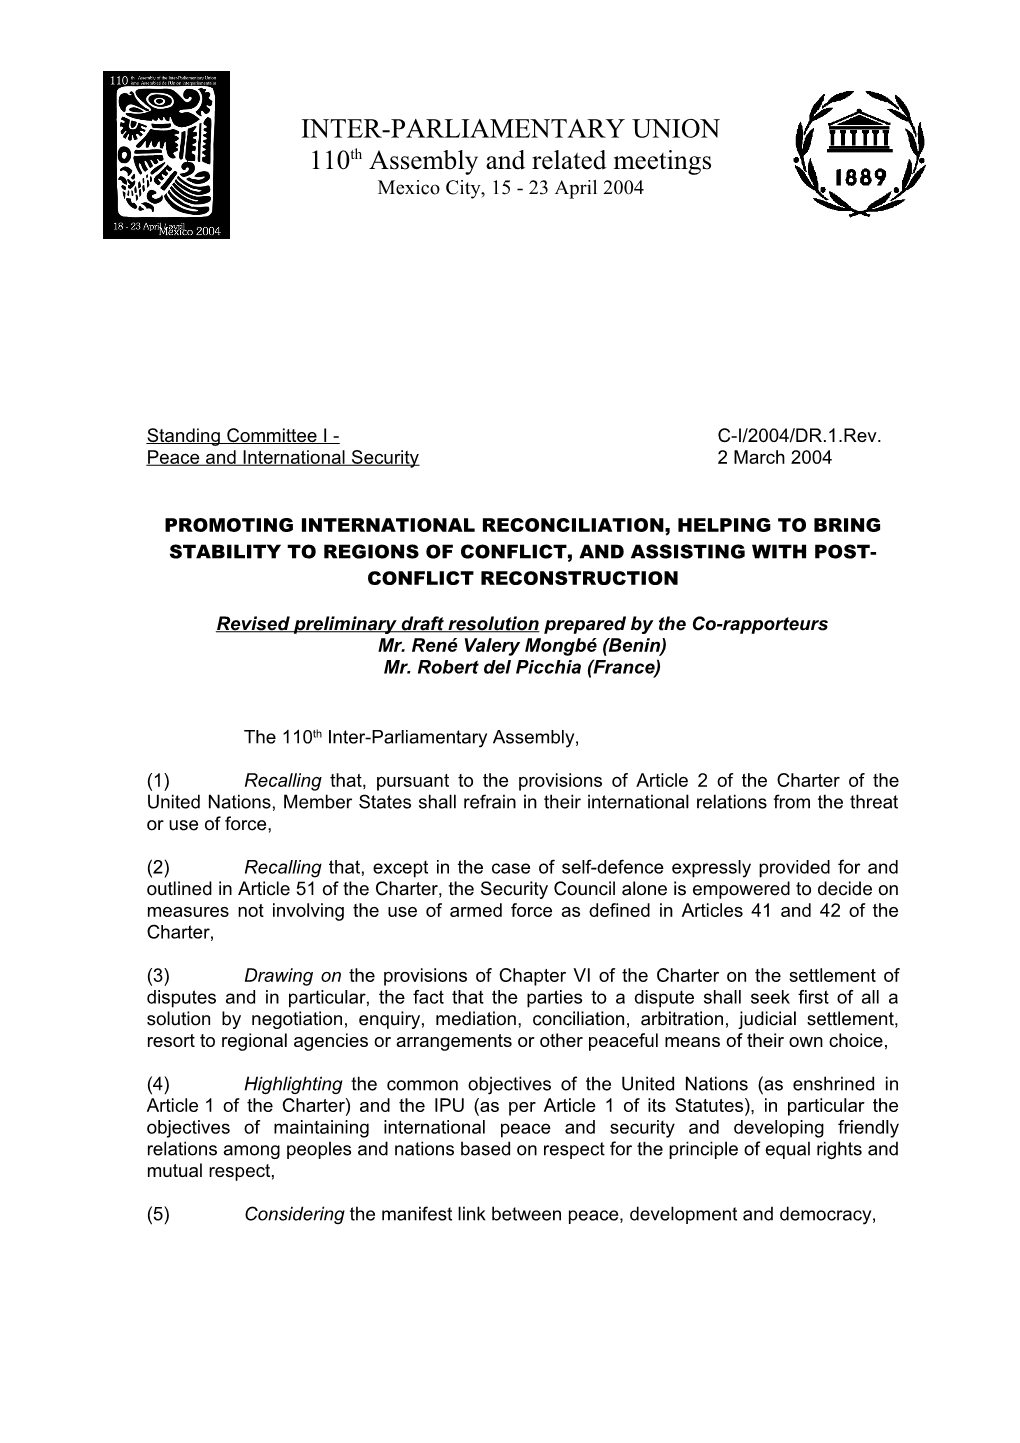 Revised Preliminary Draft Resolution Prepared by the Co-Rapporteurs